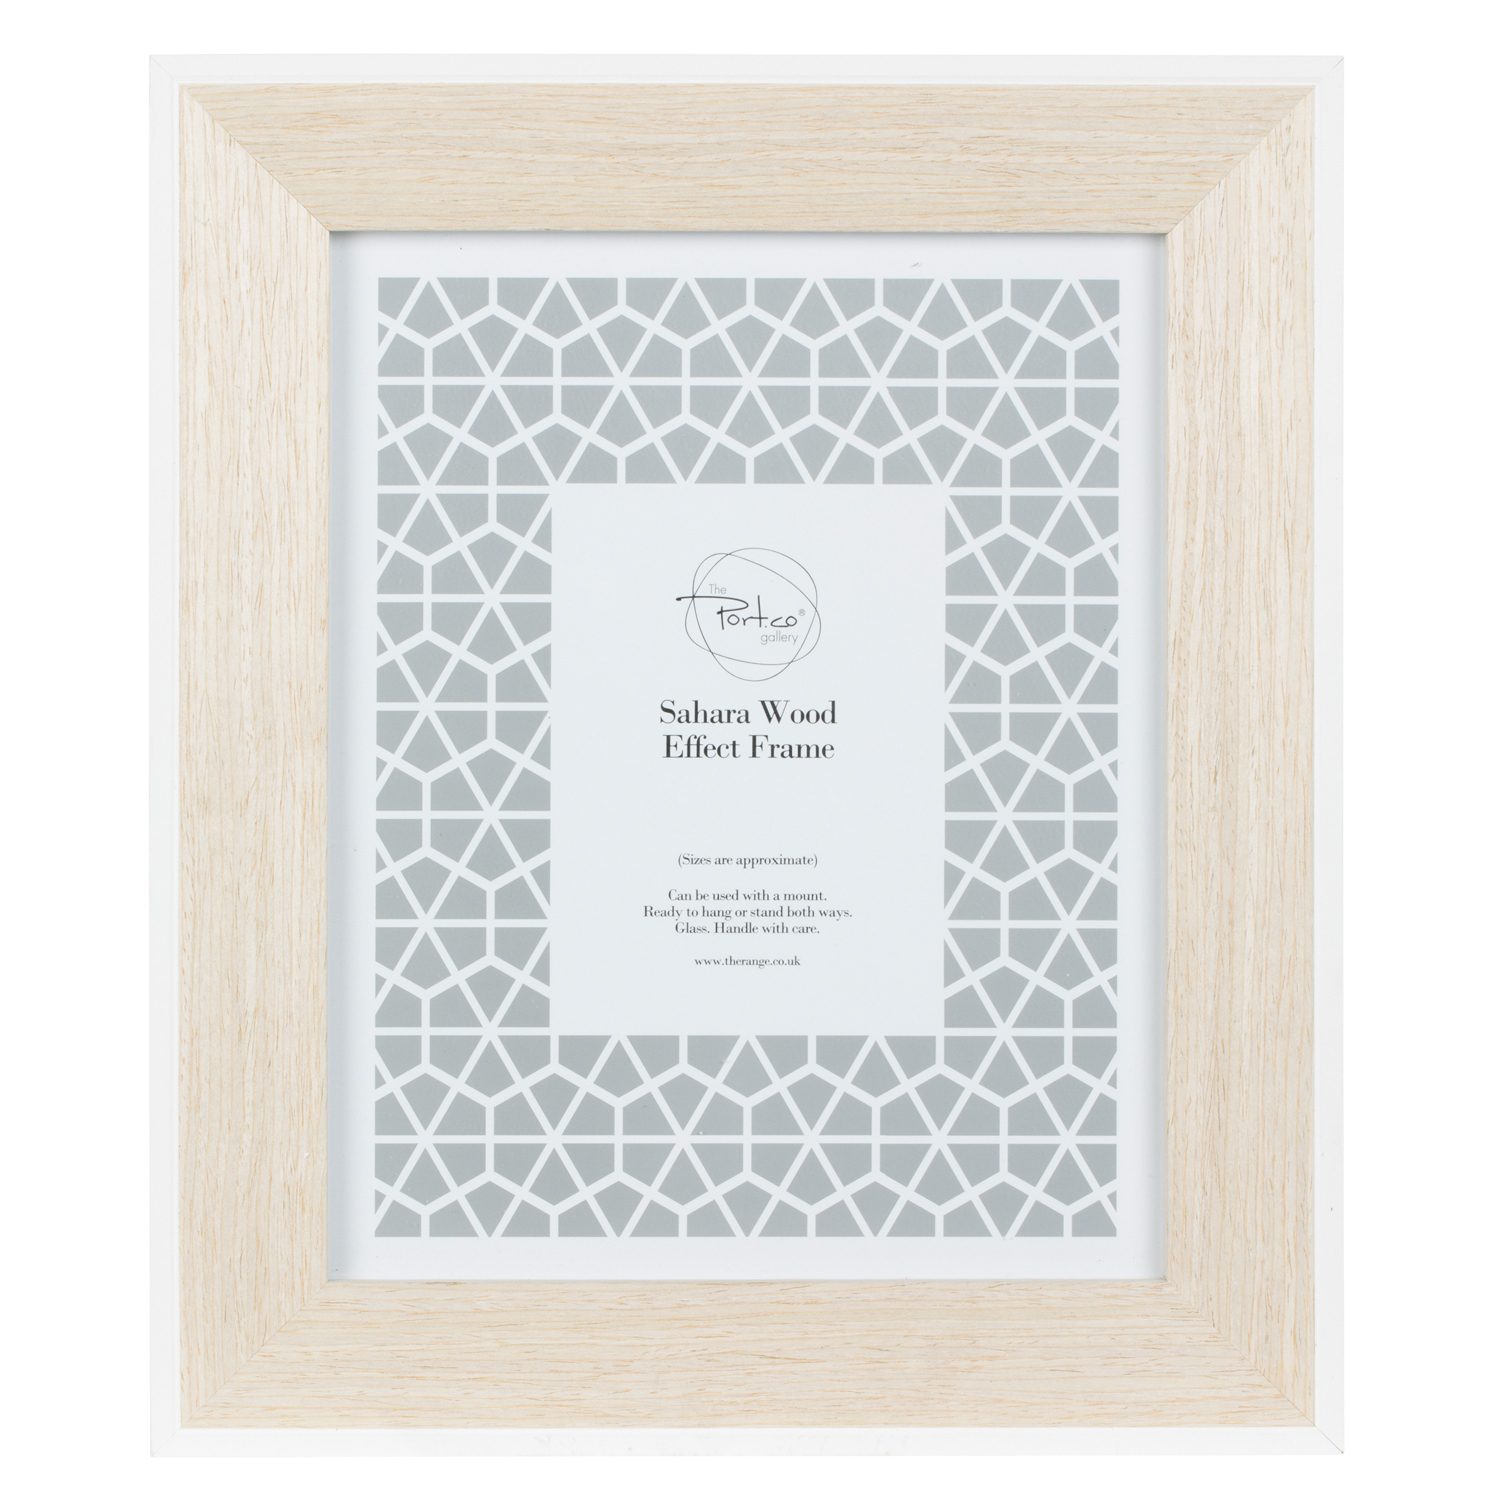 The Port. Co Gallery Sahara White Edge Wood Effect Photo Frame 12 x 10 inch Image 1